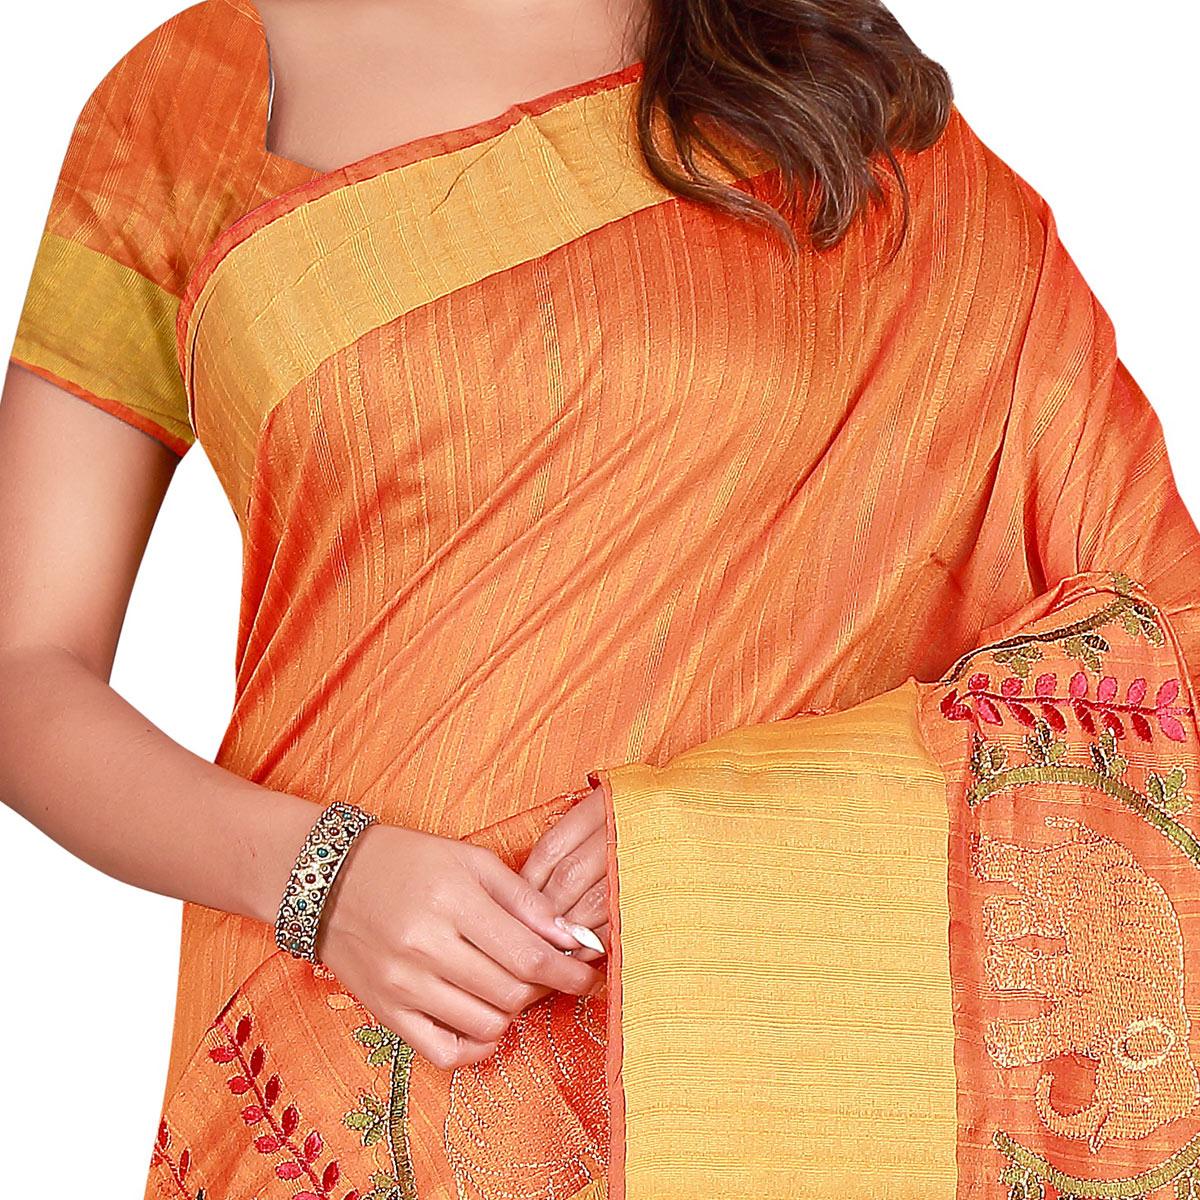 NEW IN's : Sarees Gorgeous sarees starting at 1345/- Shop here :-  http://bit.ly/1GcRwK0 or call +91-22-30770244 to pla… | Clothes for women,  Women, Indian fashion